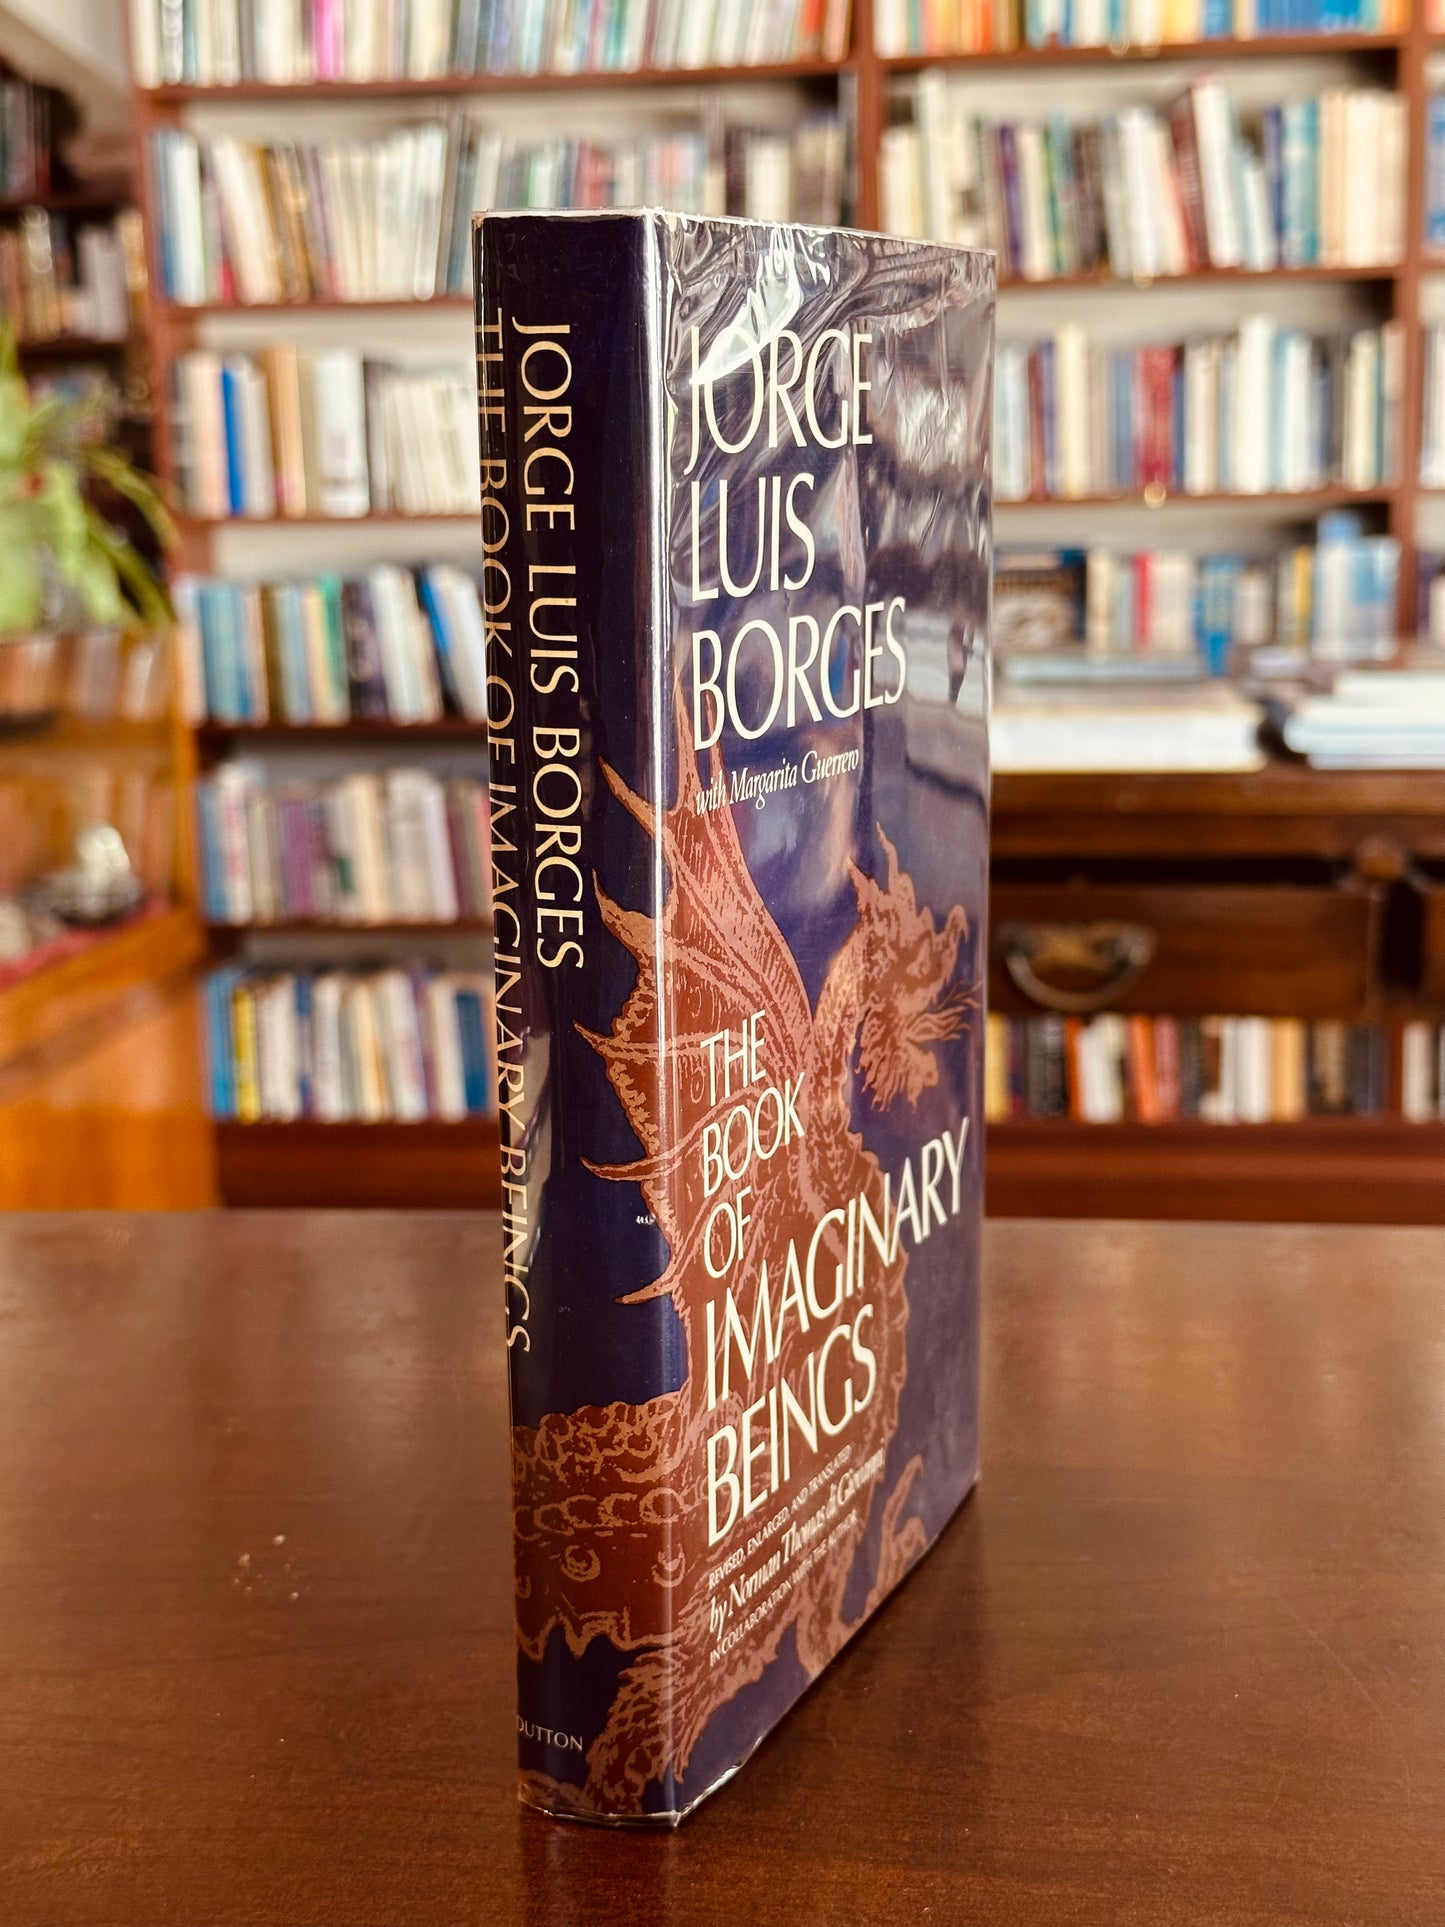 The Book of Imaginary Beings by Jorge Luis Borges (First Edition)